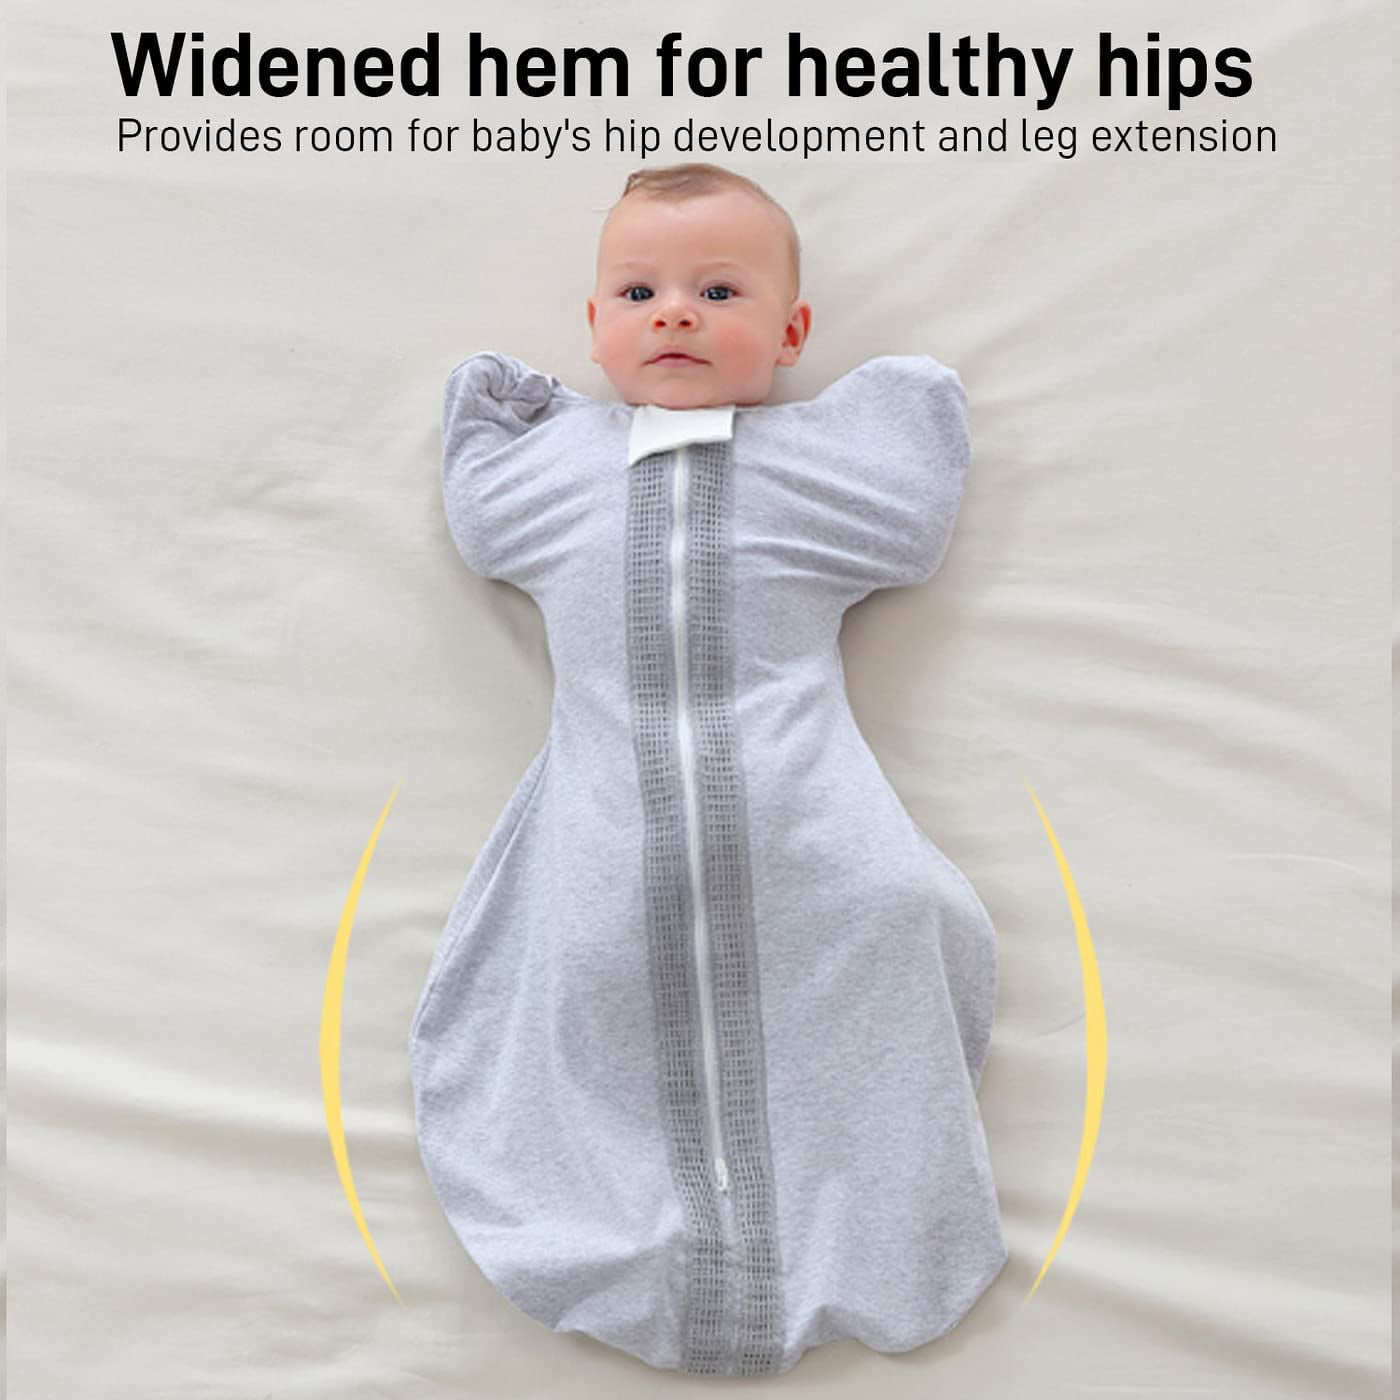  KIDIRA Swaddle for Newborns, Baby Swaddles 0-3 Months 5-13lb,  Arms Up Swaddle 0-3 Months Newborn with Moisture-Wicking Fabric, Promotes  Healthy Hip Development, 2-Way Zipper & Foot Buttons, 1Pack : Baby